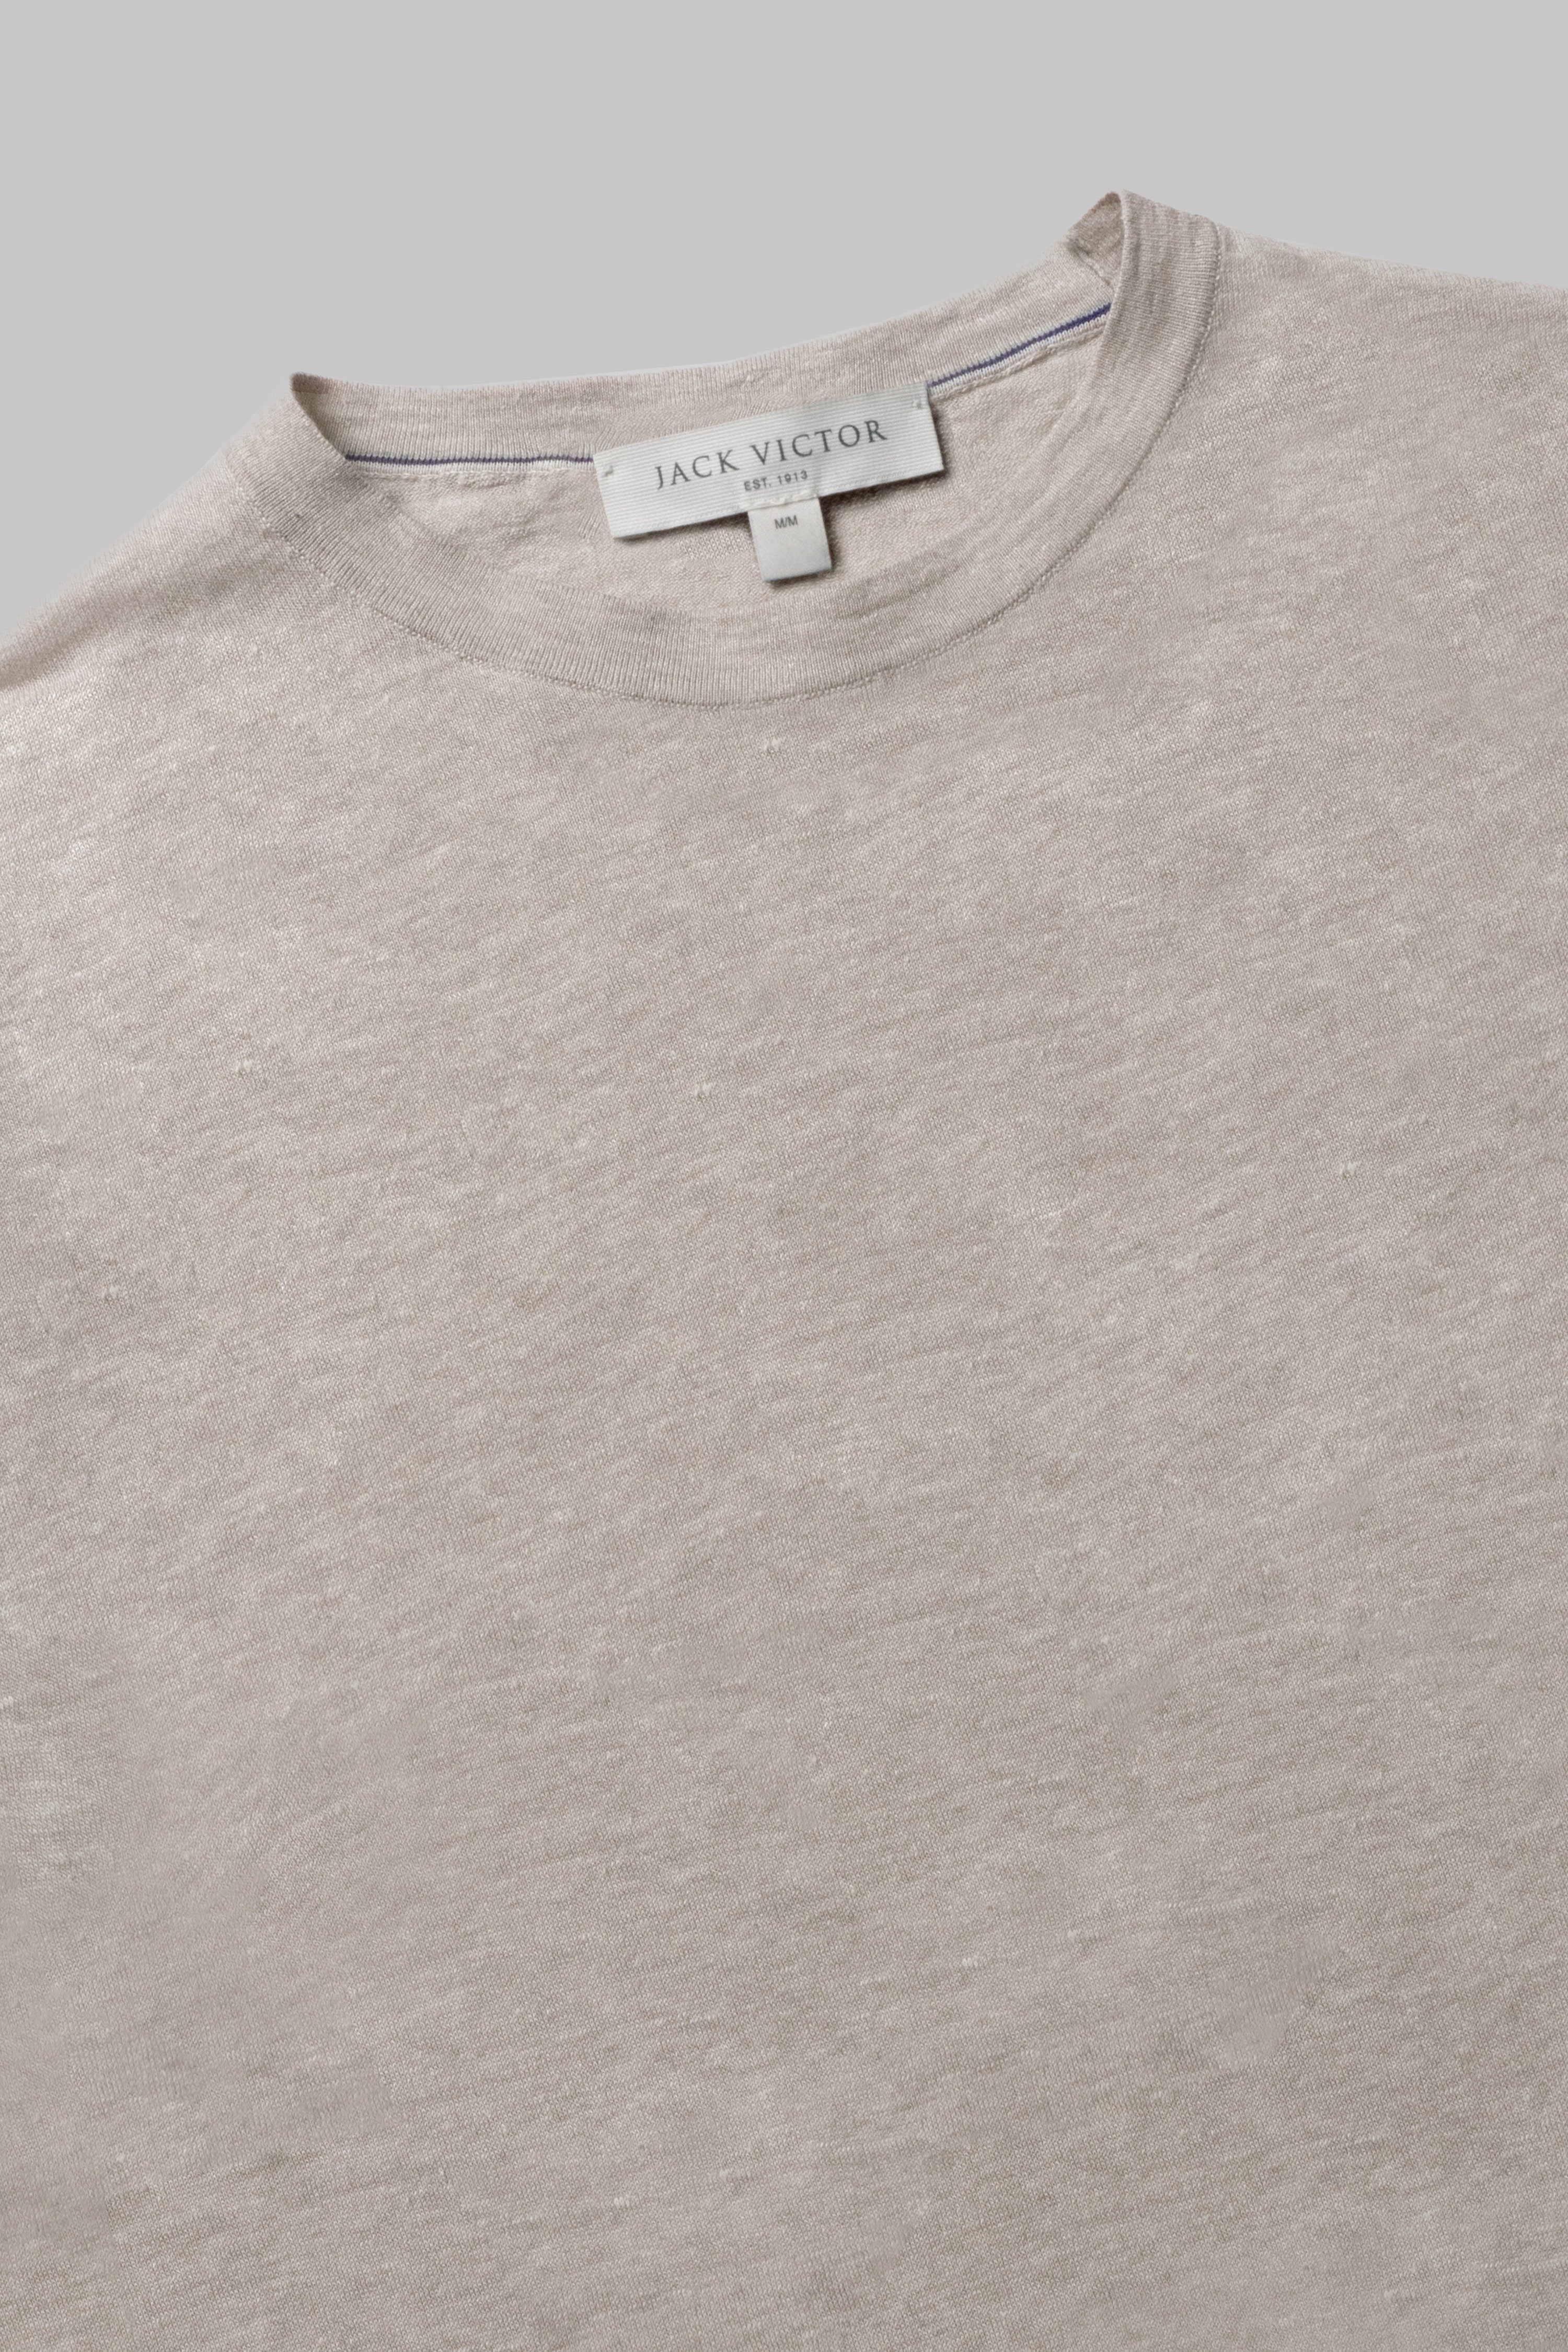 Alt view 1 Westmount Linen and Cotton Knit Crew Neck in Sand